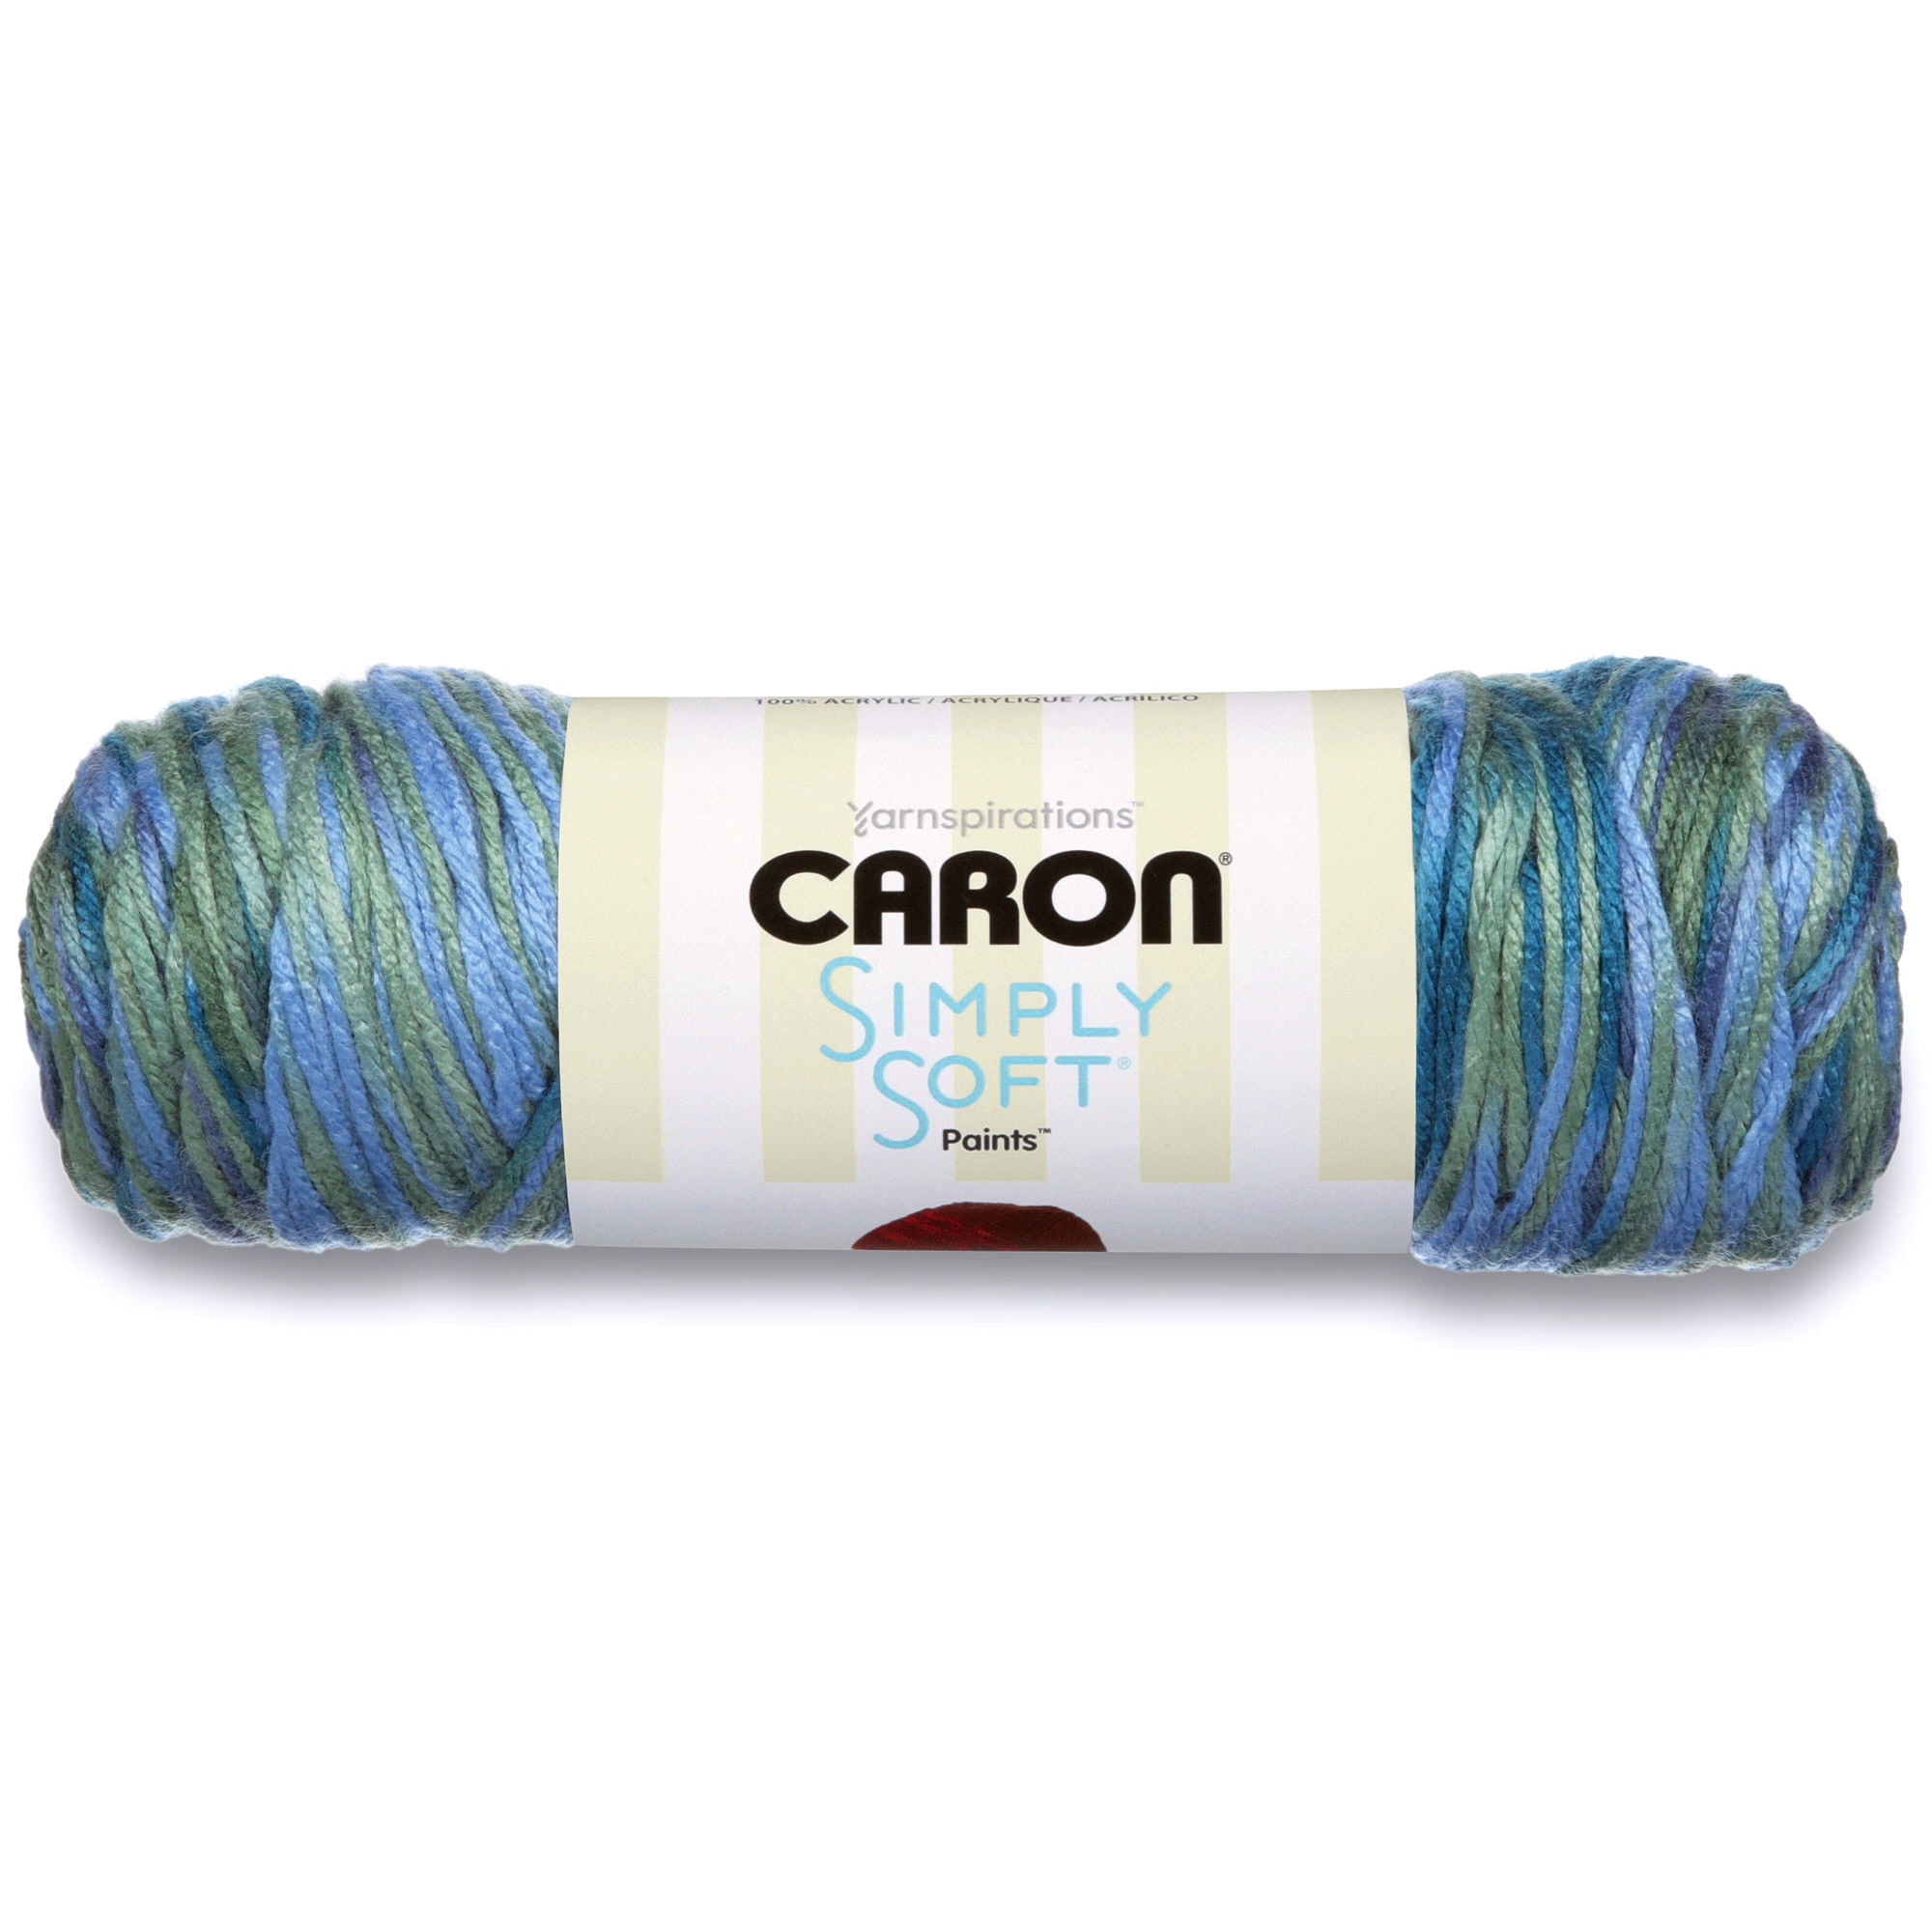 Caron Simply Soft Stripes Yarn-Times Square 100% acrylic-imported 